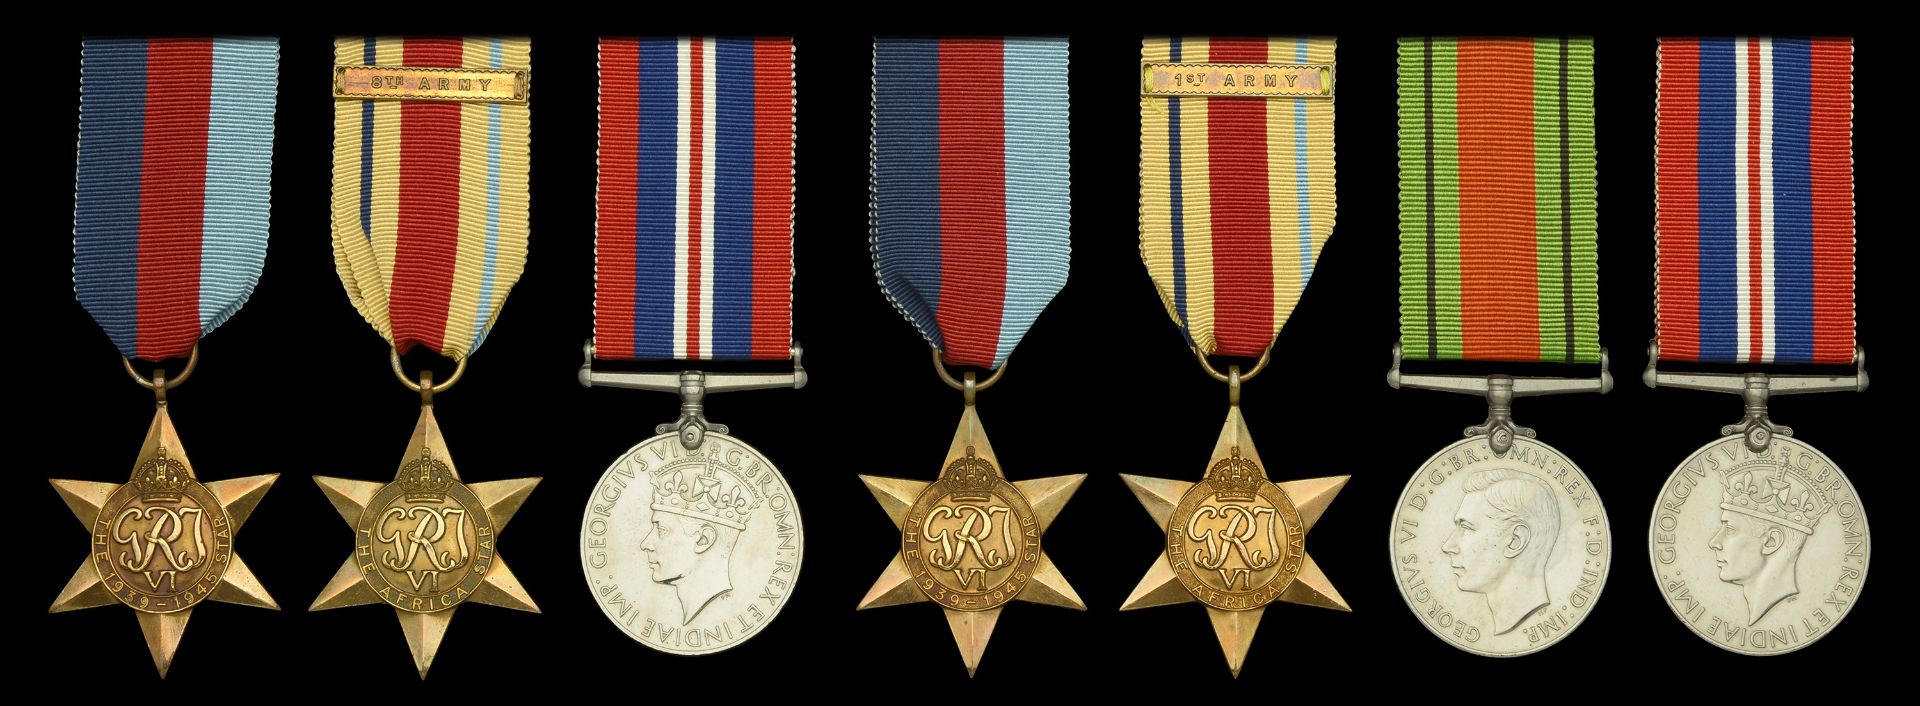 Three: attributed to Private R. Rayner, The Buffs, who was killed in action at El Alamein on...